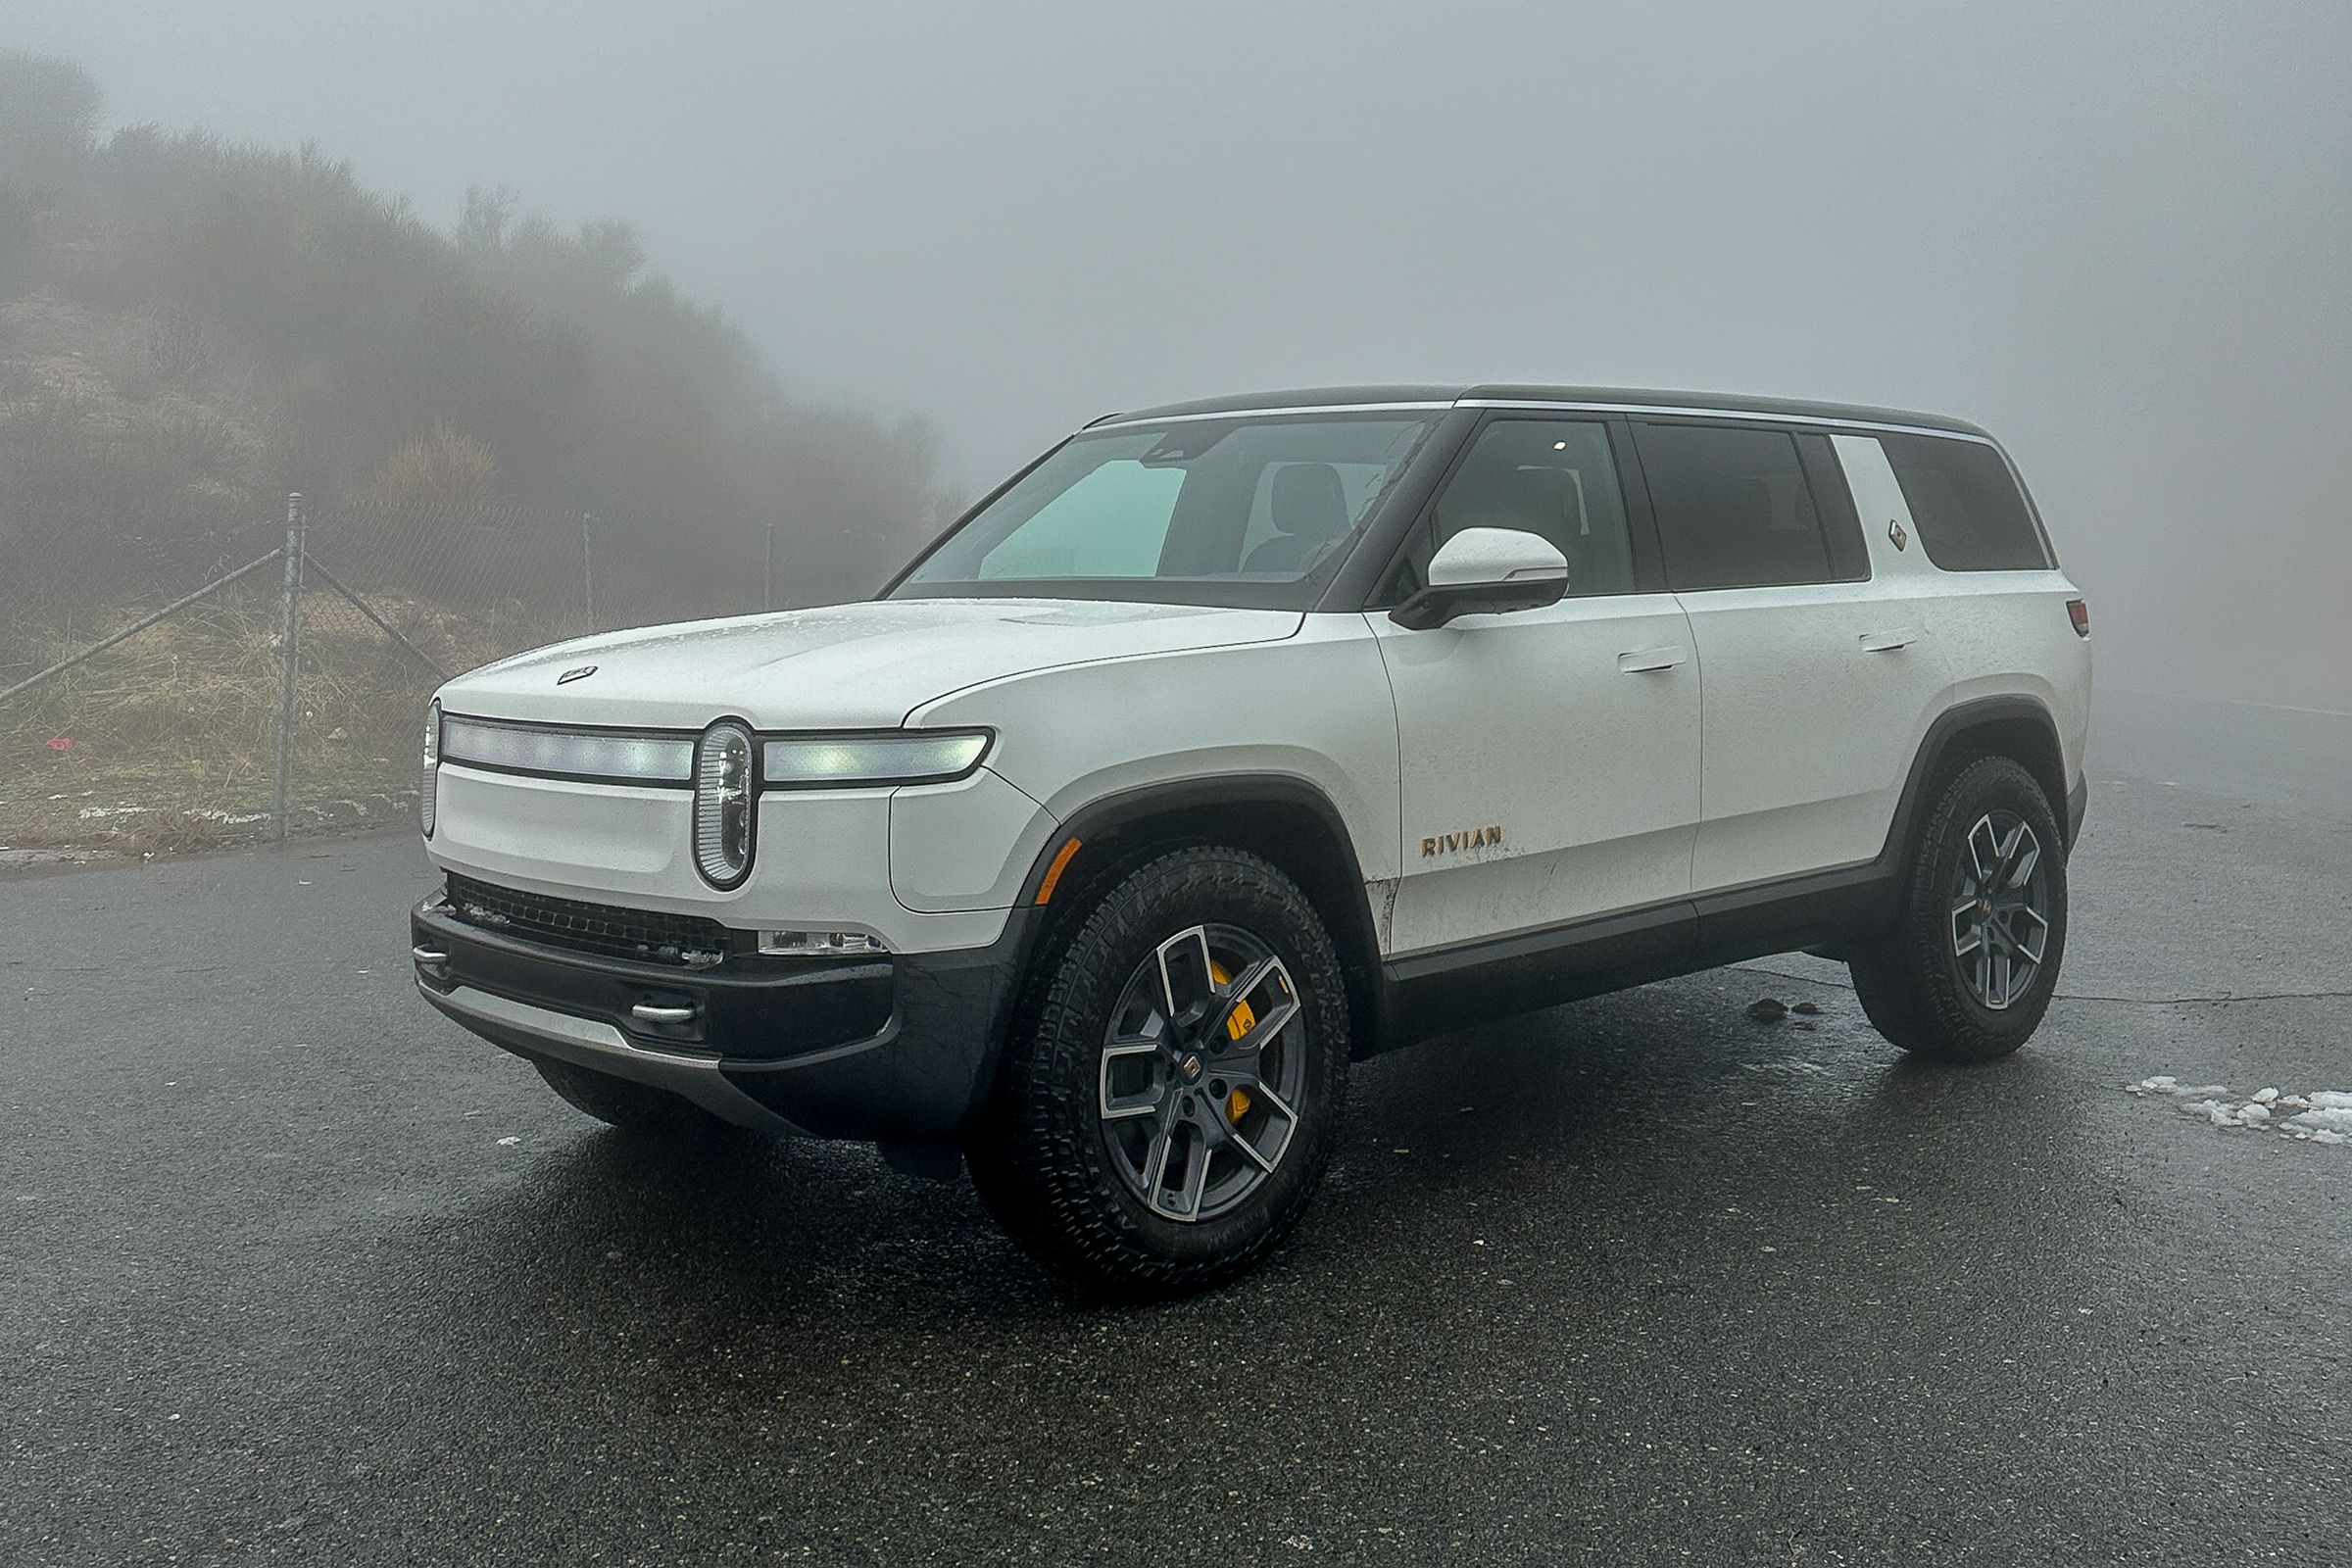 White R1S SUV in a foggy environment